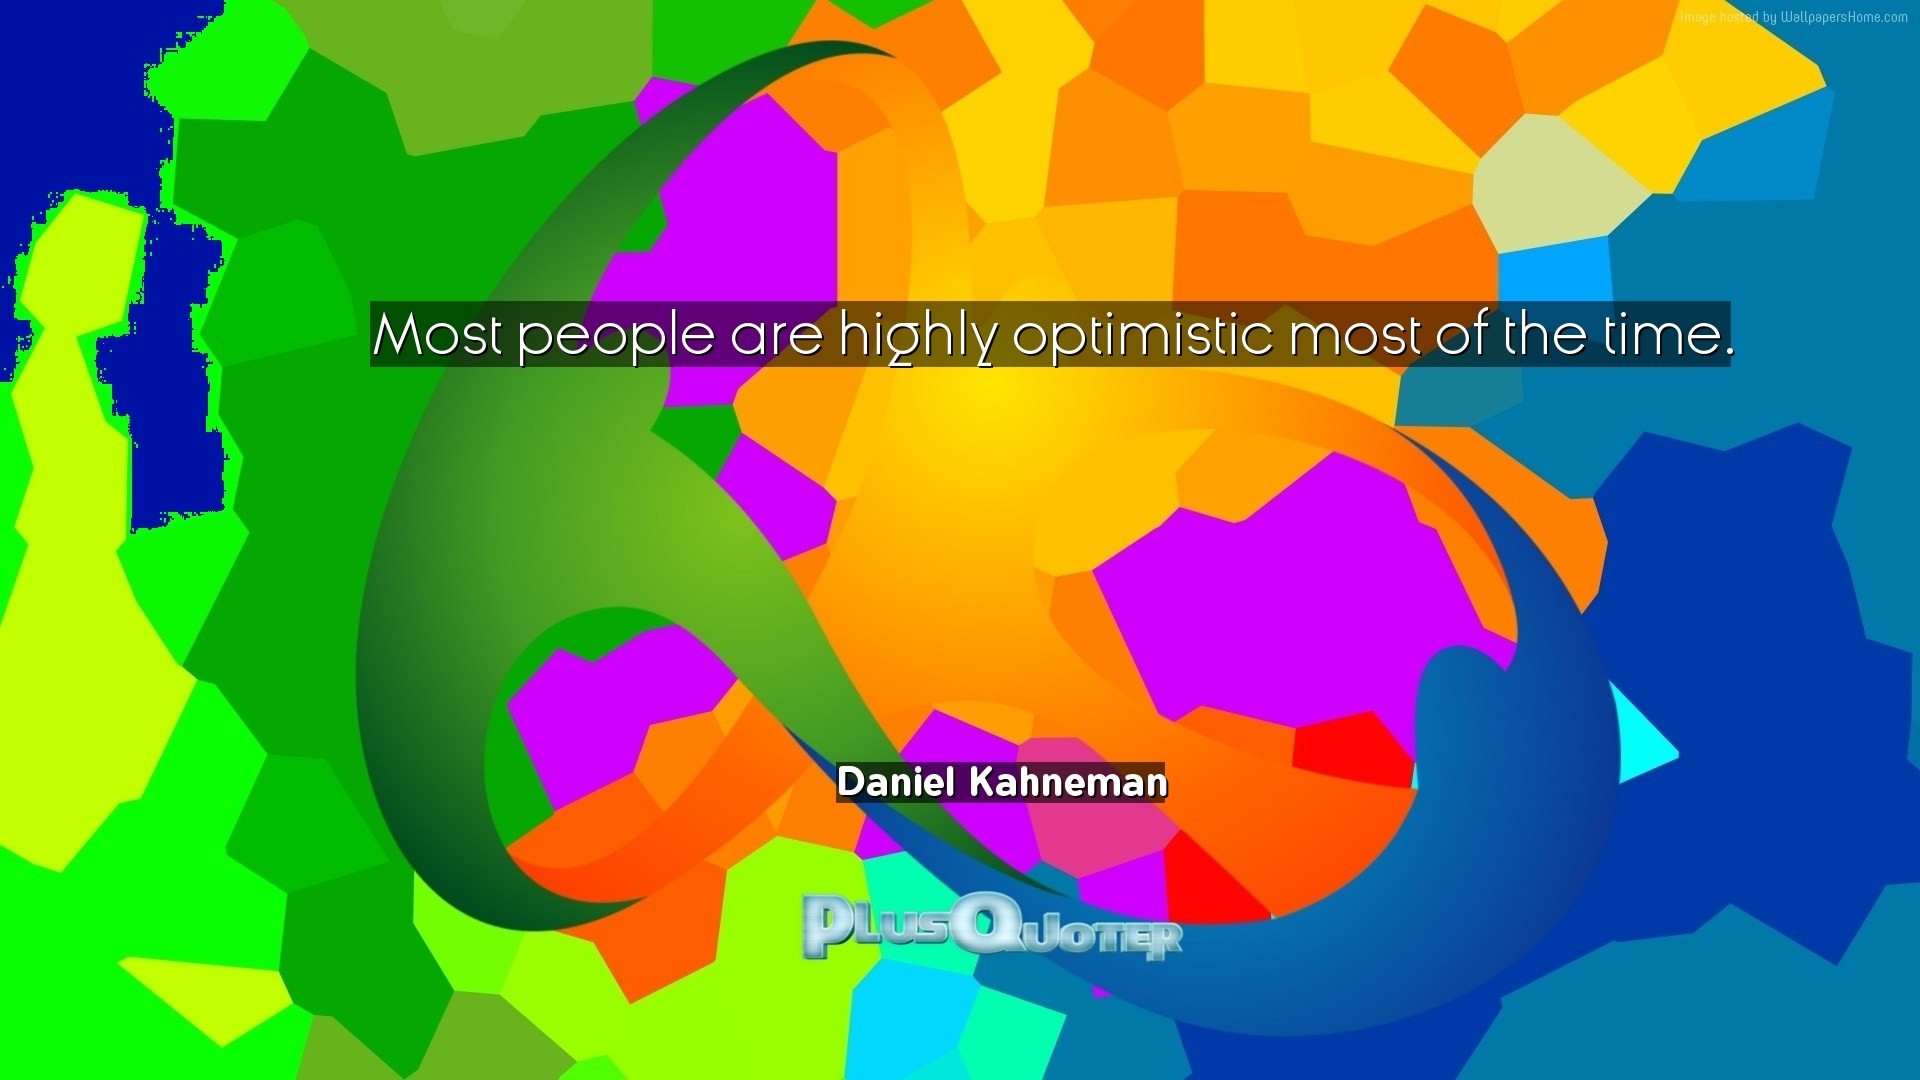 1920x1080 Download Wallpaper with inspirational Quotes- "Most people are highly  optimistic most of the time. “